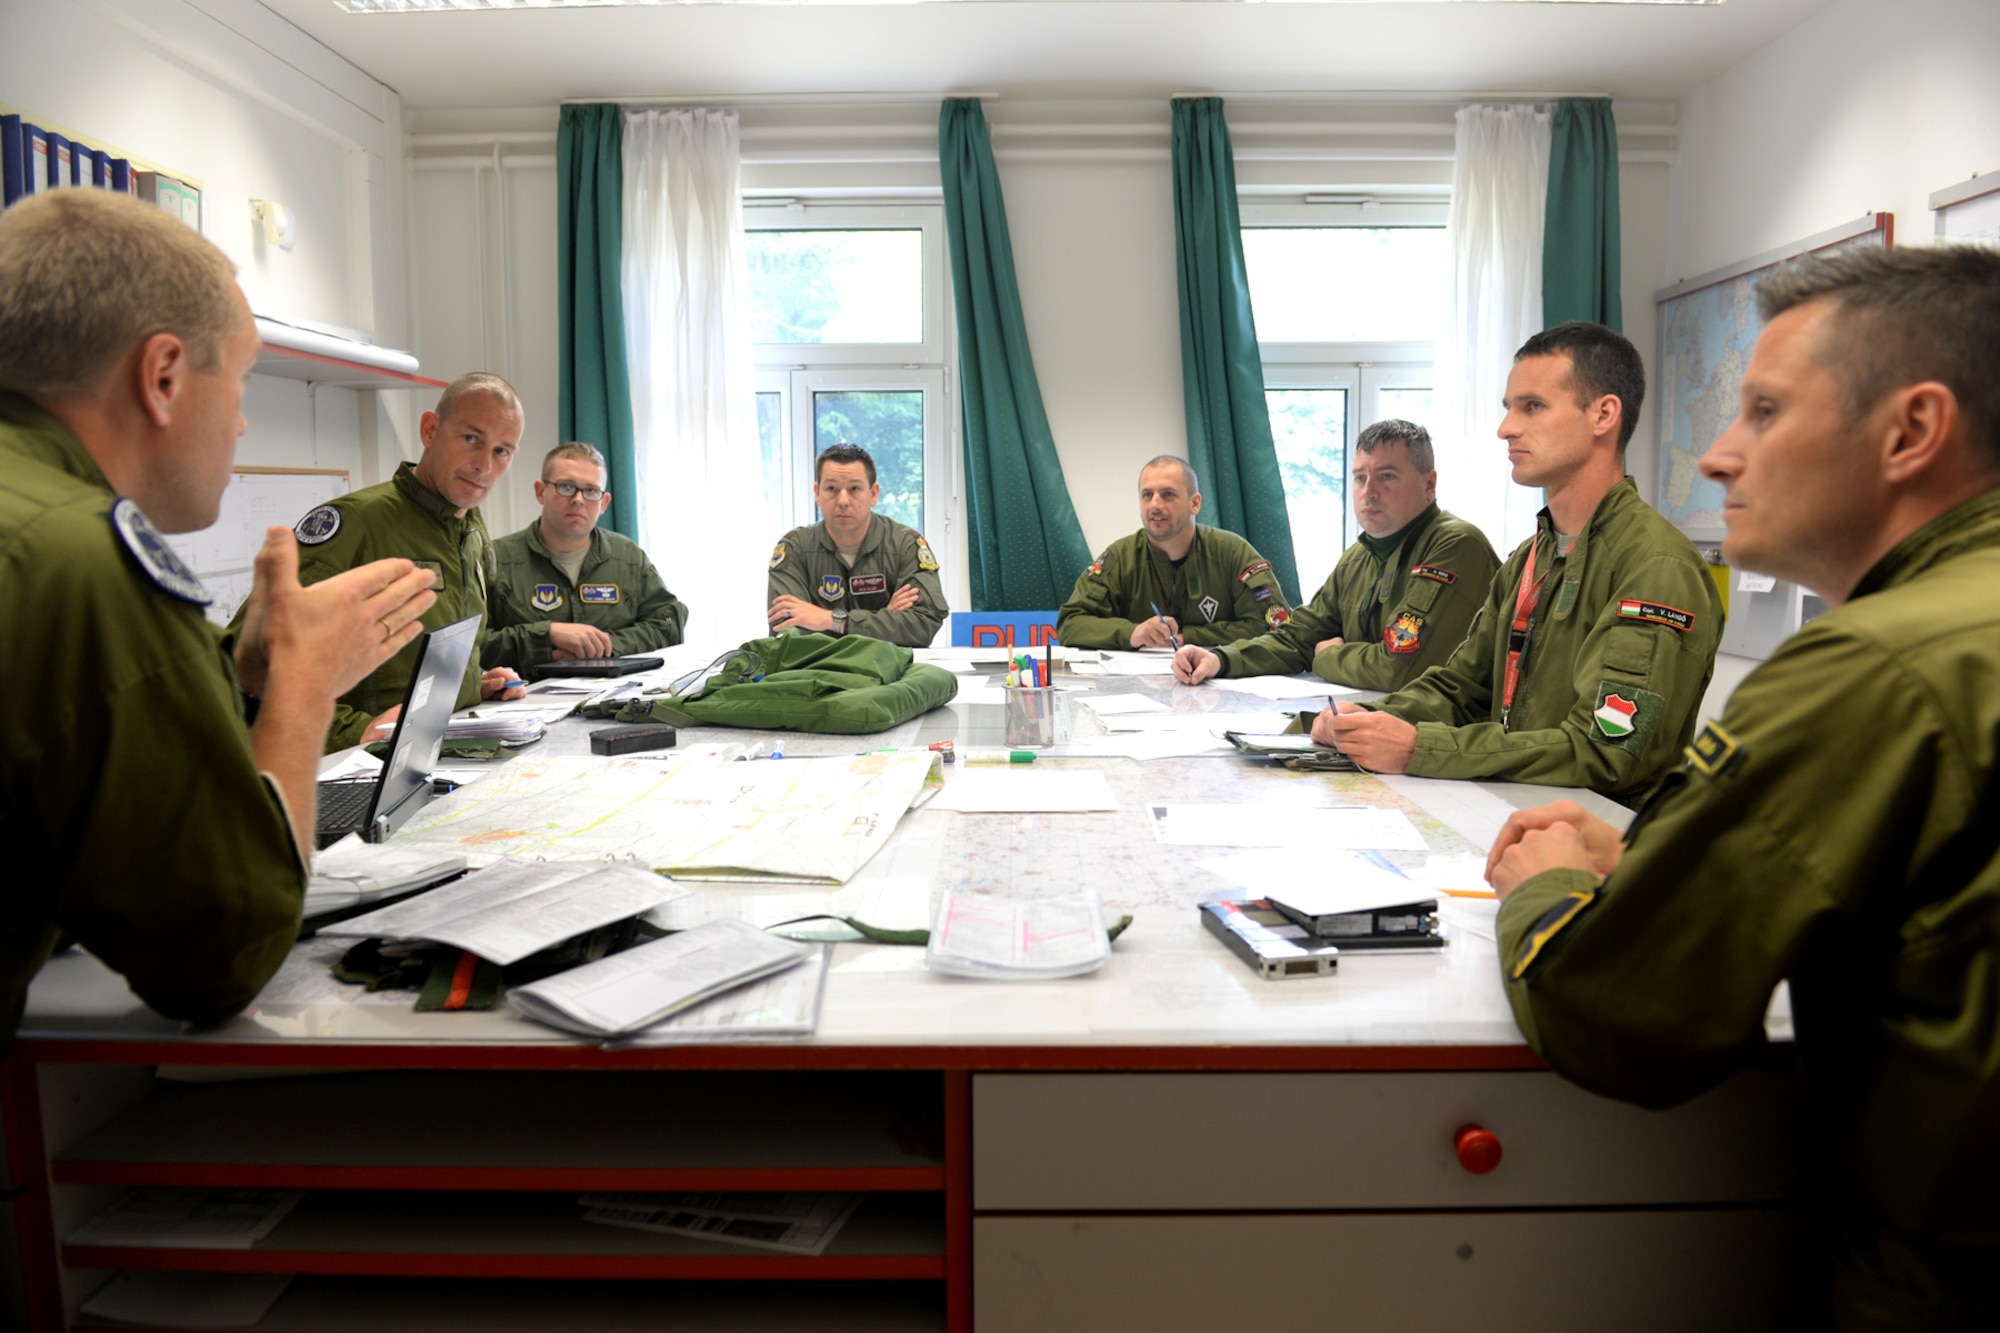 Swedish air force Capt. Fredrik Borgsrtöm, Swedish AF Gripen Operational Testing and Evaluation instructor pilot, discusses the flight plan with U.S. and Hungarian air forces prior to flying June 24, 2015, during AR familiarization training on Kecskemét air base, Hungary. The familiarization started with two days of classroom academics then each Hungarian Gripen pilot flew with a Swedish instructor pilot for hands-on practice. (U.S. Air Force photo by Senior Airman Kate Thornton/Released)